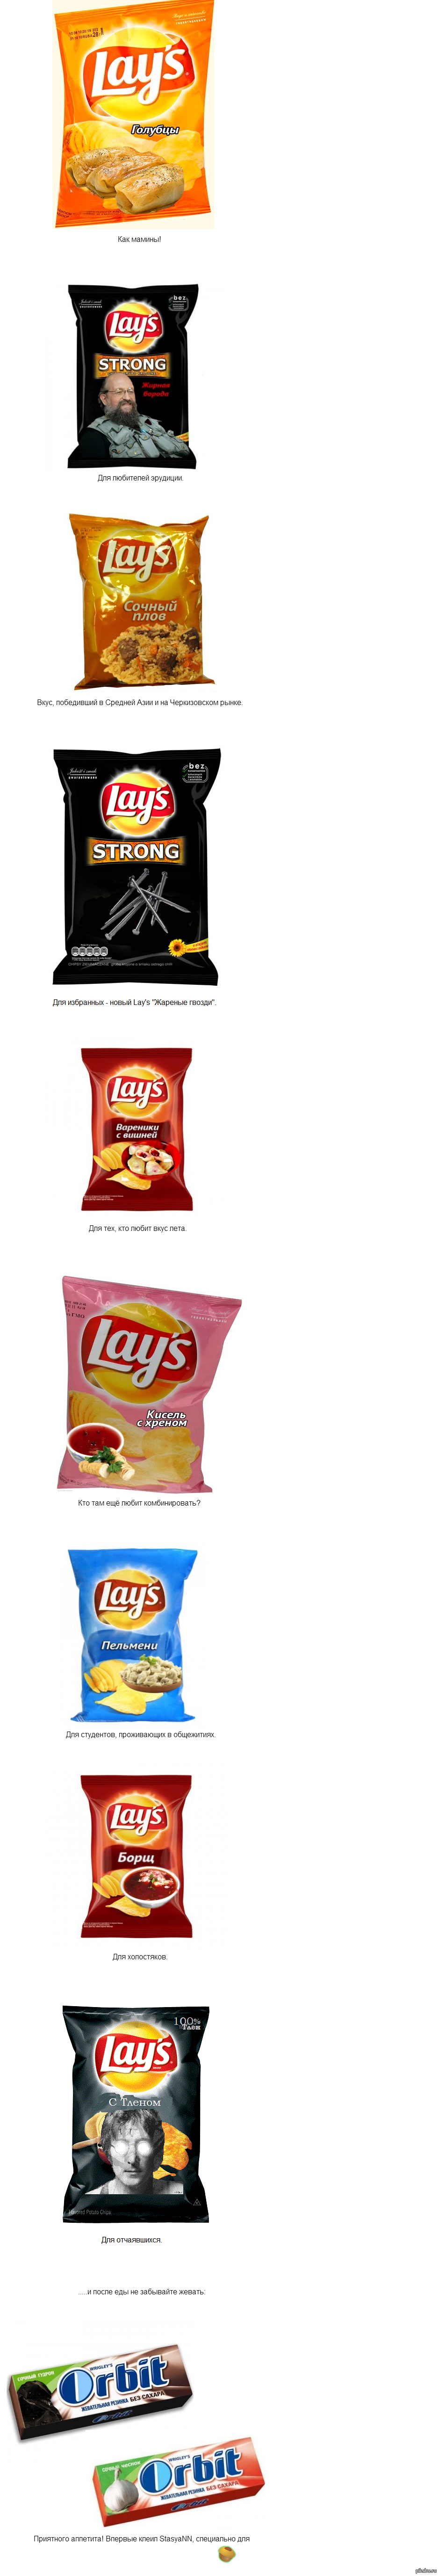 New competition for the best taste of Lay's! - My, Lays, Crisps, Comments, Longpost